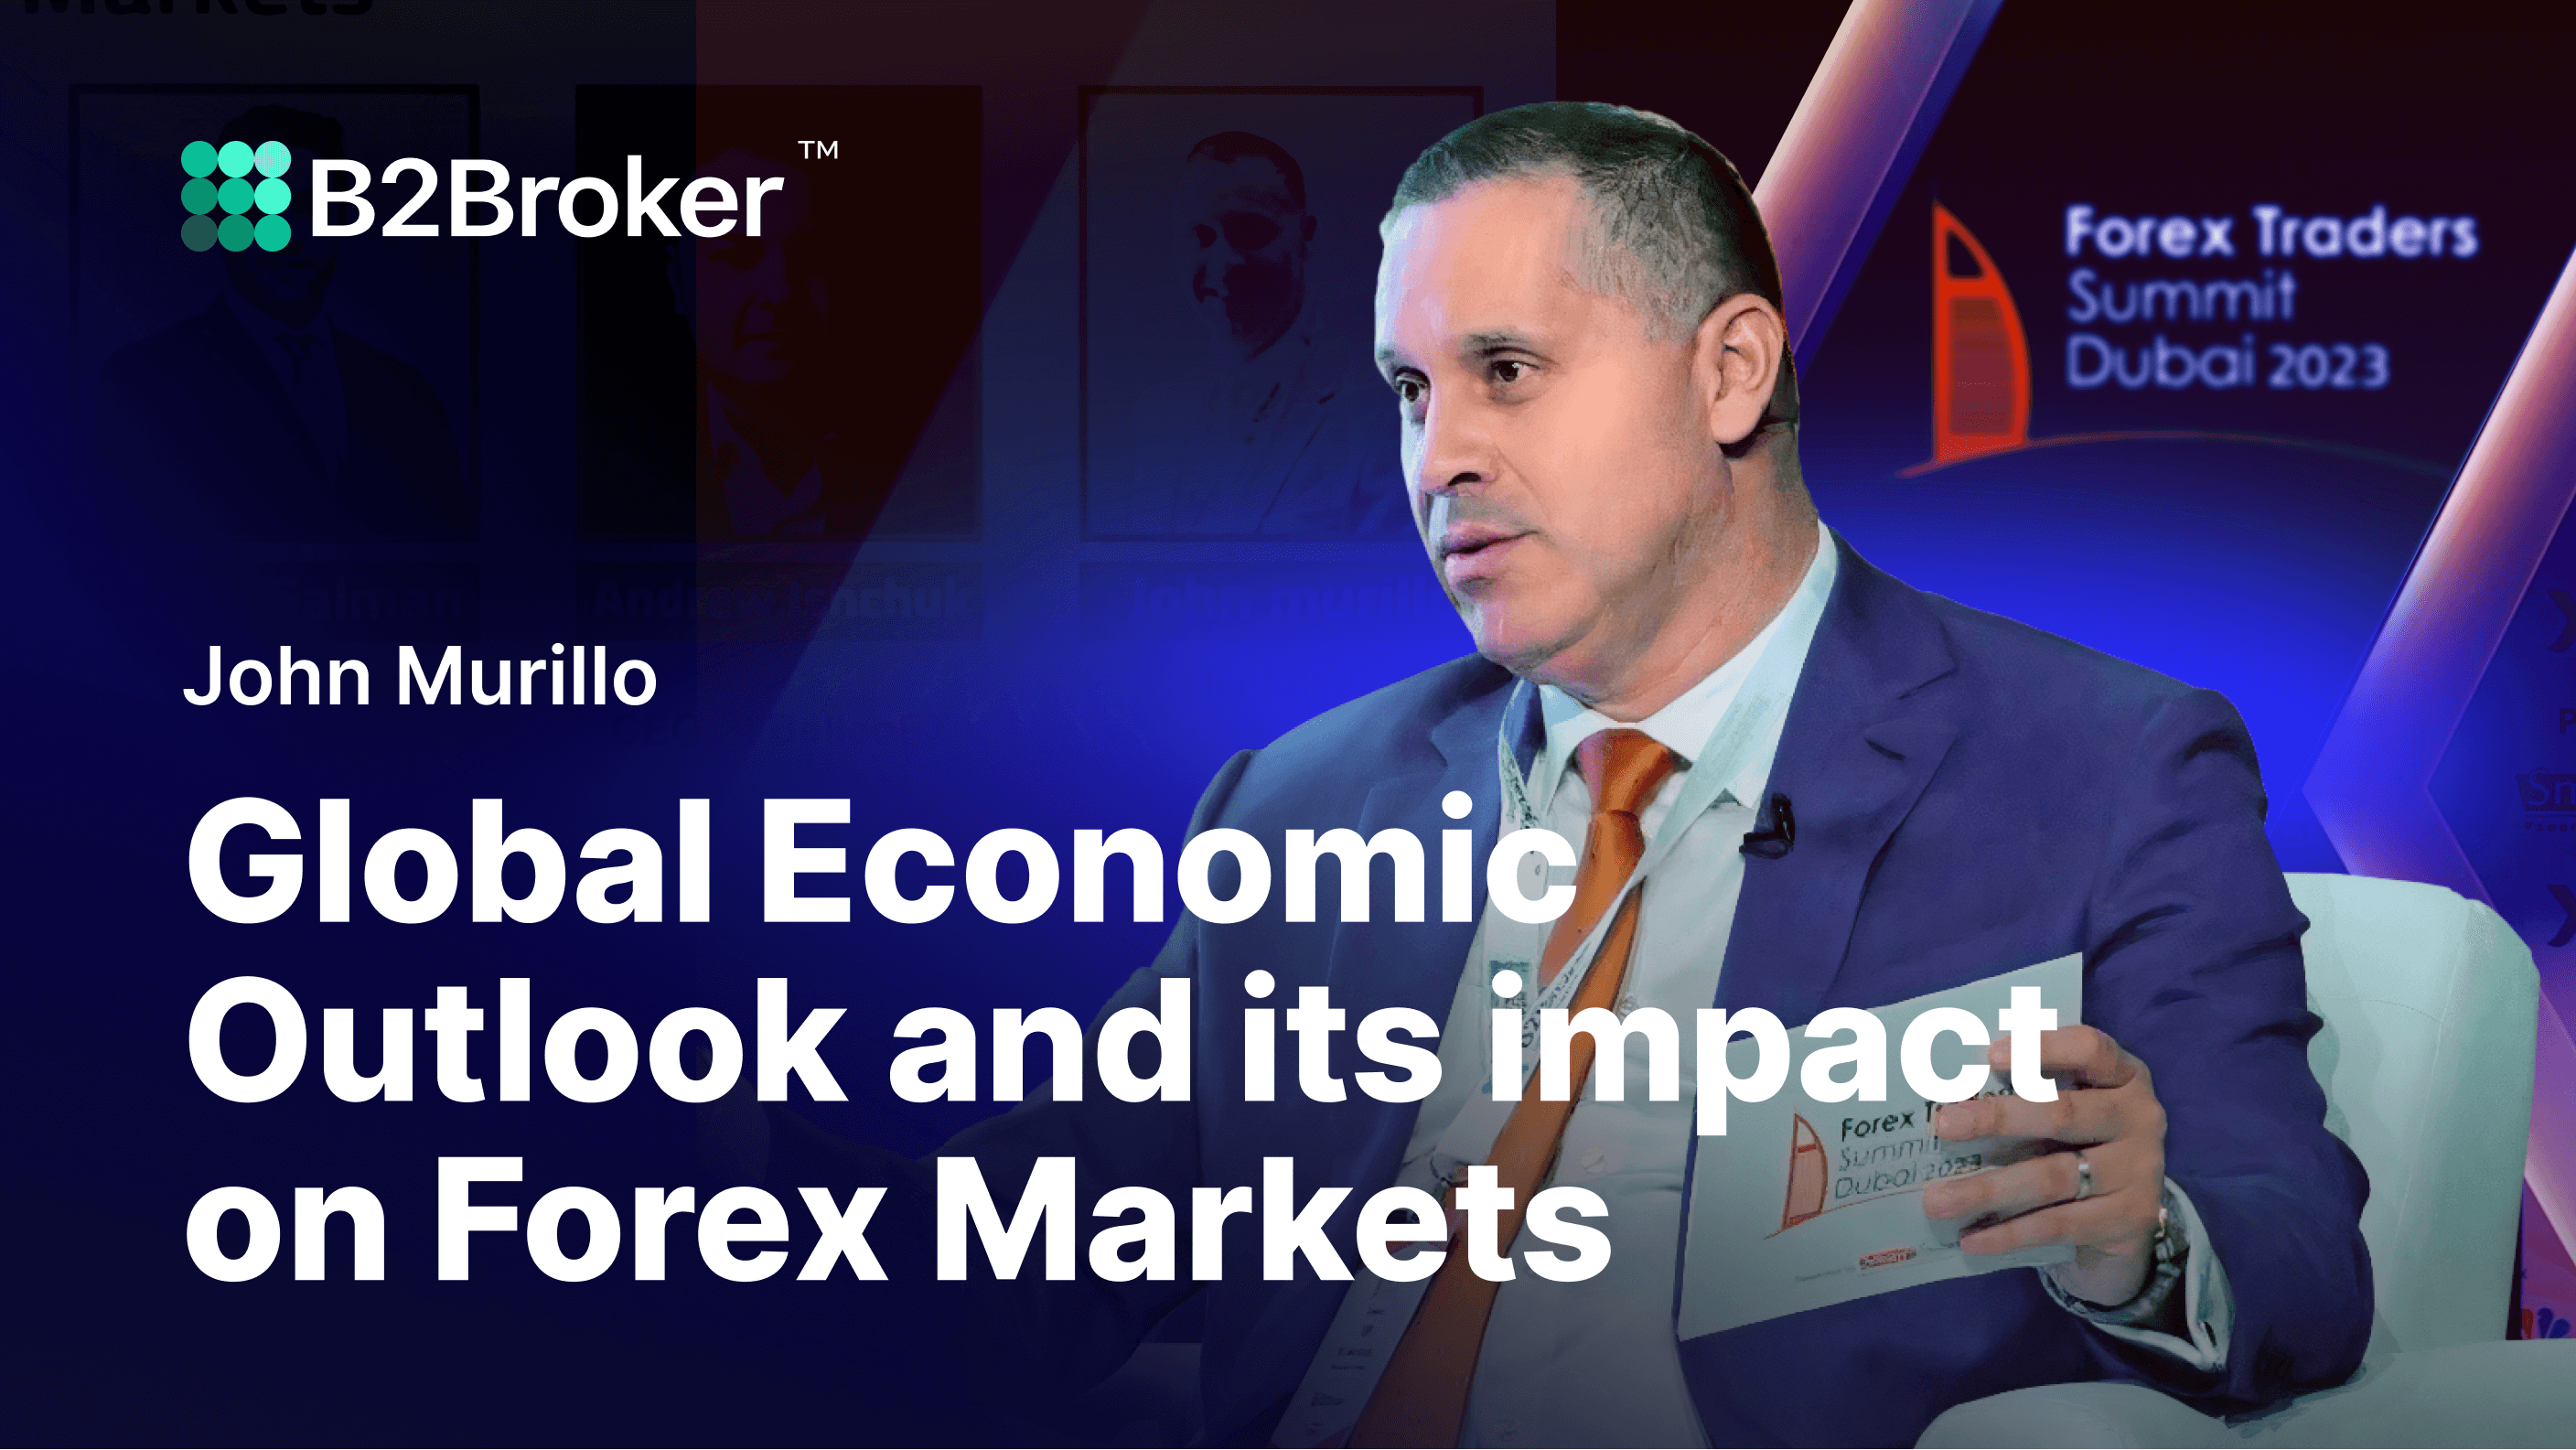 Forex Traders Summit 2023 | Global Economic Outlook & Its Impact on Forex Markets